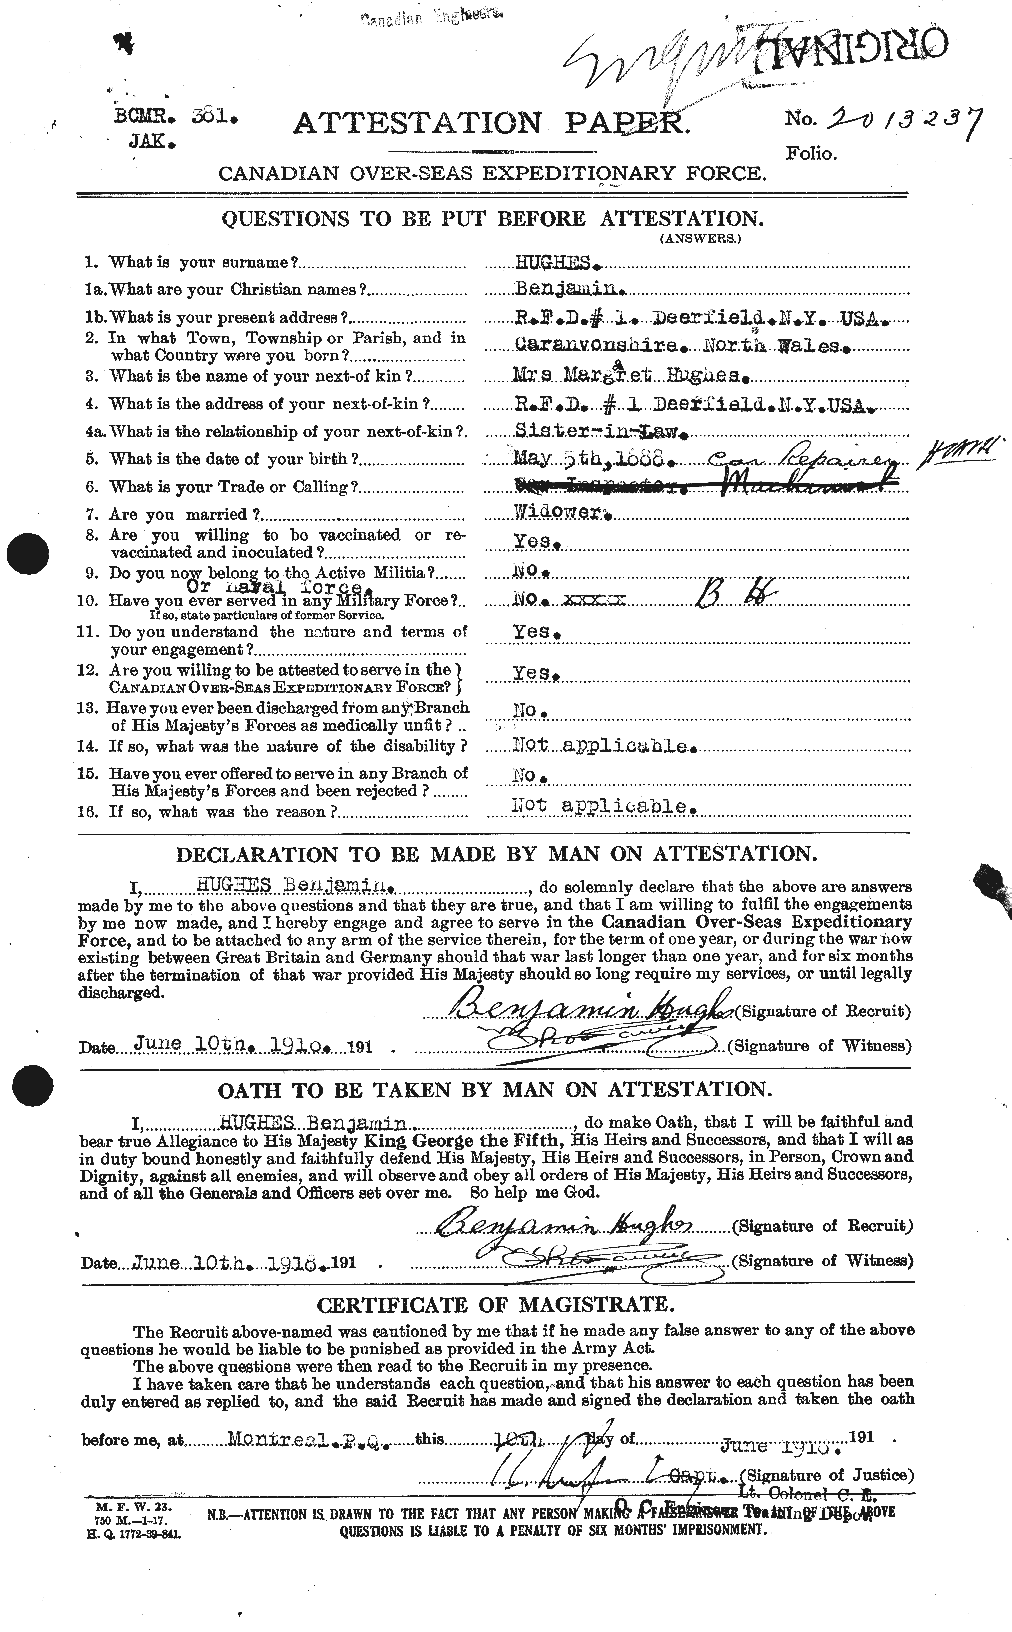 Personnel Records of the First World War - CEF 402576a